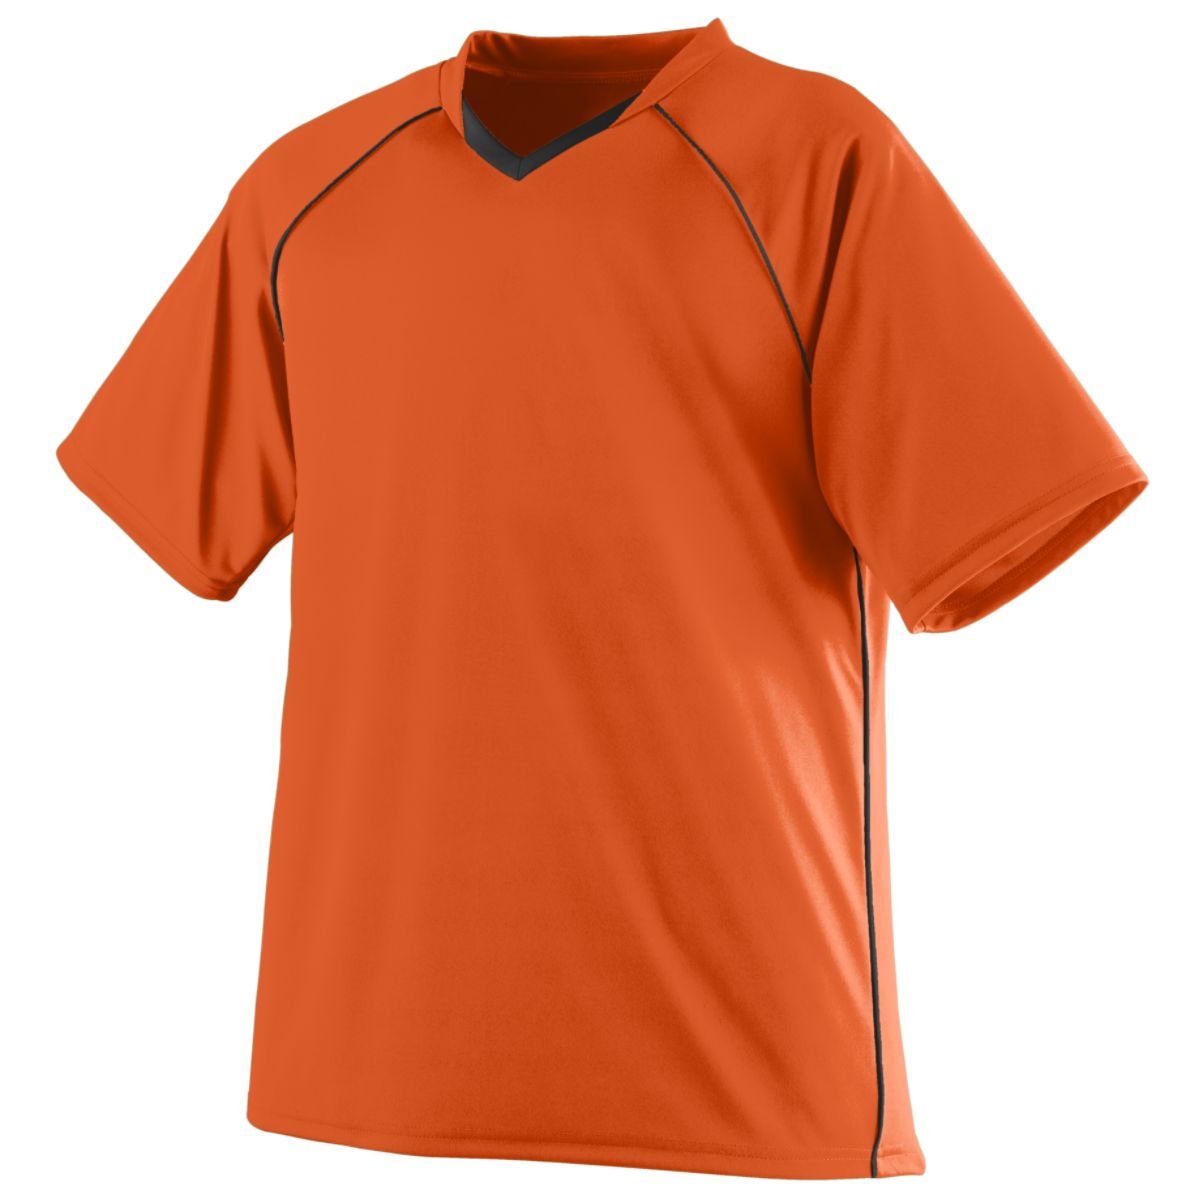 Augusta Sportswear Striker Jersey in Orange/Black  -Part of the Adult, Adult-Jersey, Augusta-Products, Soccer, Shirts, All-Sports-1 product lines at KanaleyCreations.com